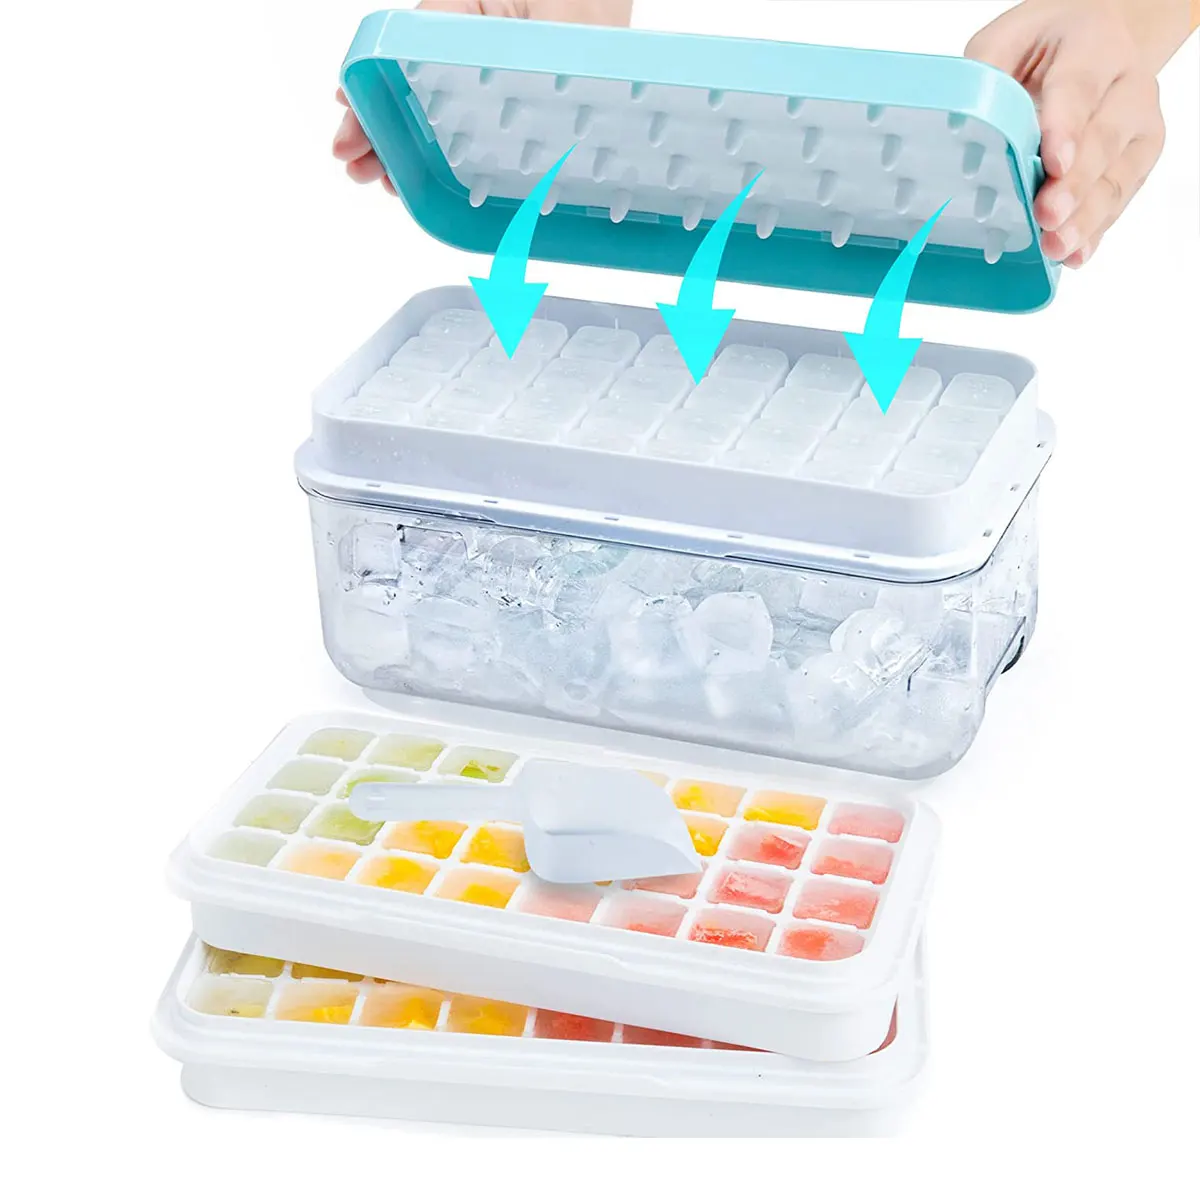 https://ae01.alicdn.com/kf/Sa3c25fc485d04c2a8de234a3700500c1F/Ice-Cube-Tray-for-Freezer-64-Nuggets-Ice-Tray-with-Lid-and-Storage-Bin-Stackable-Easy.jpg